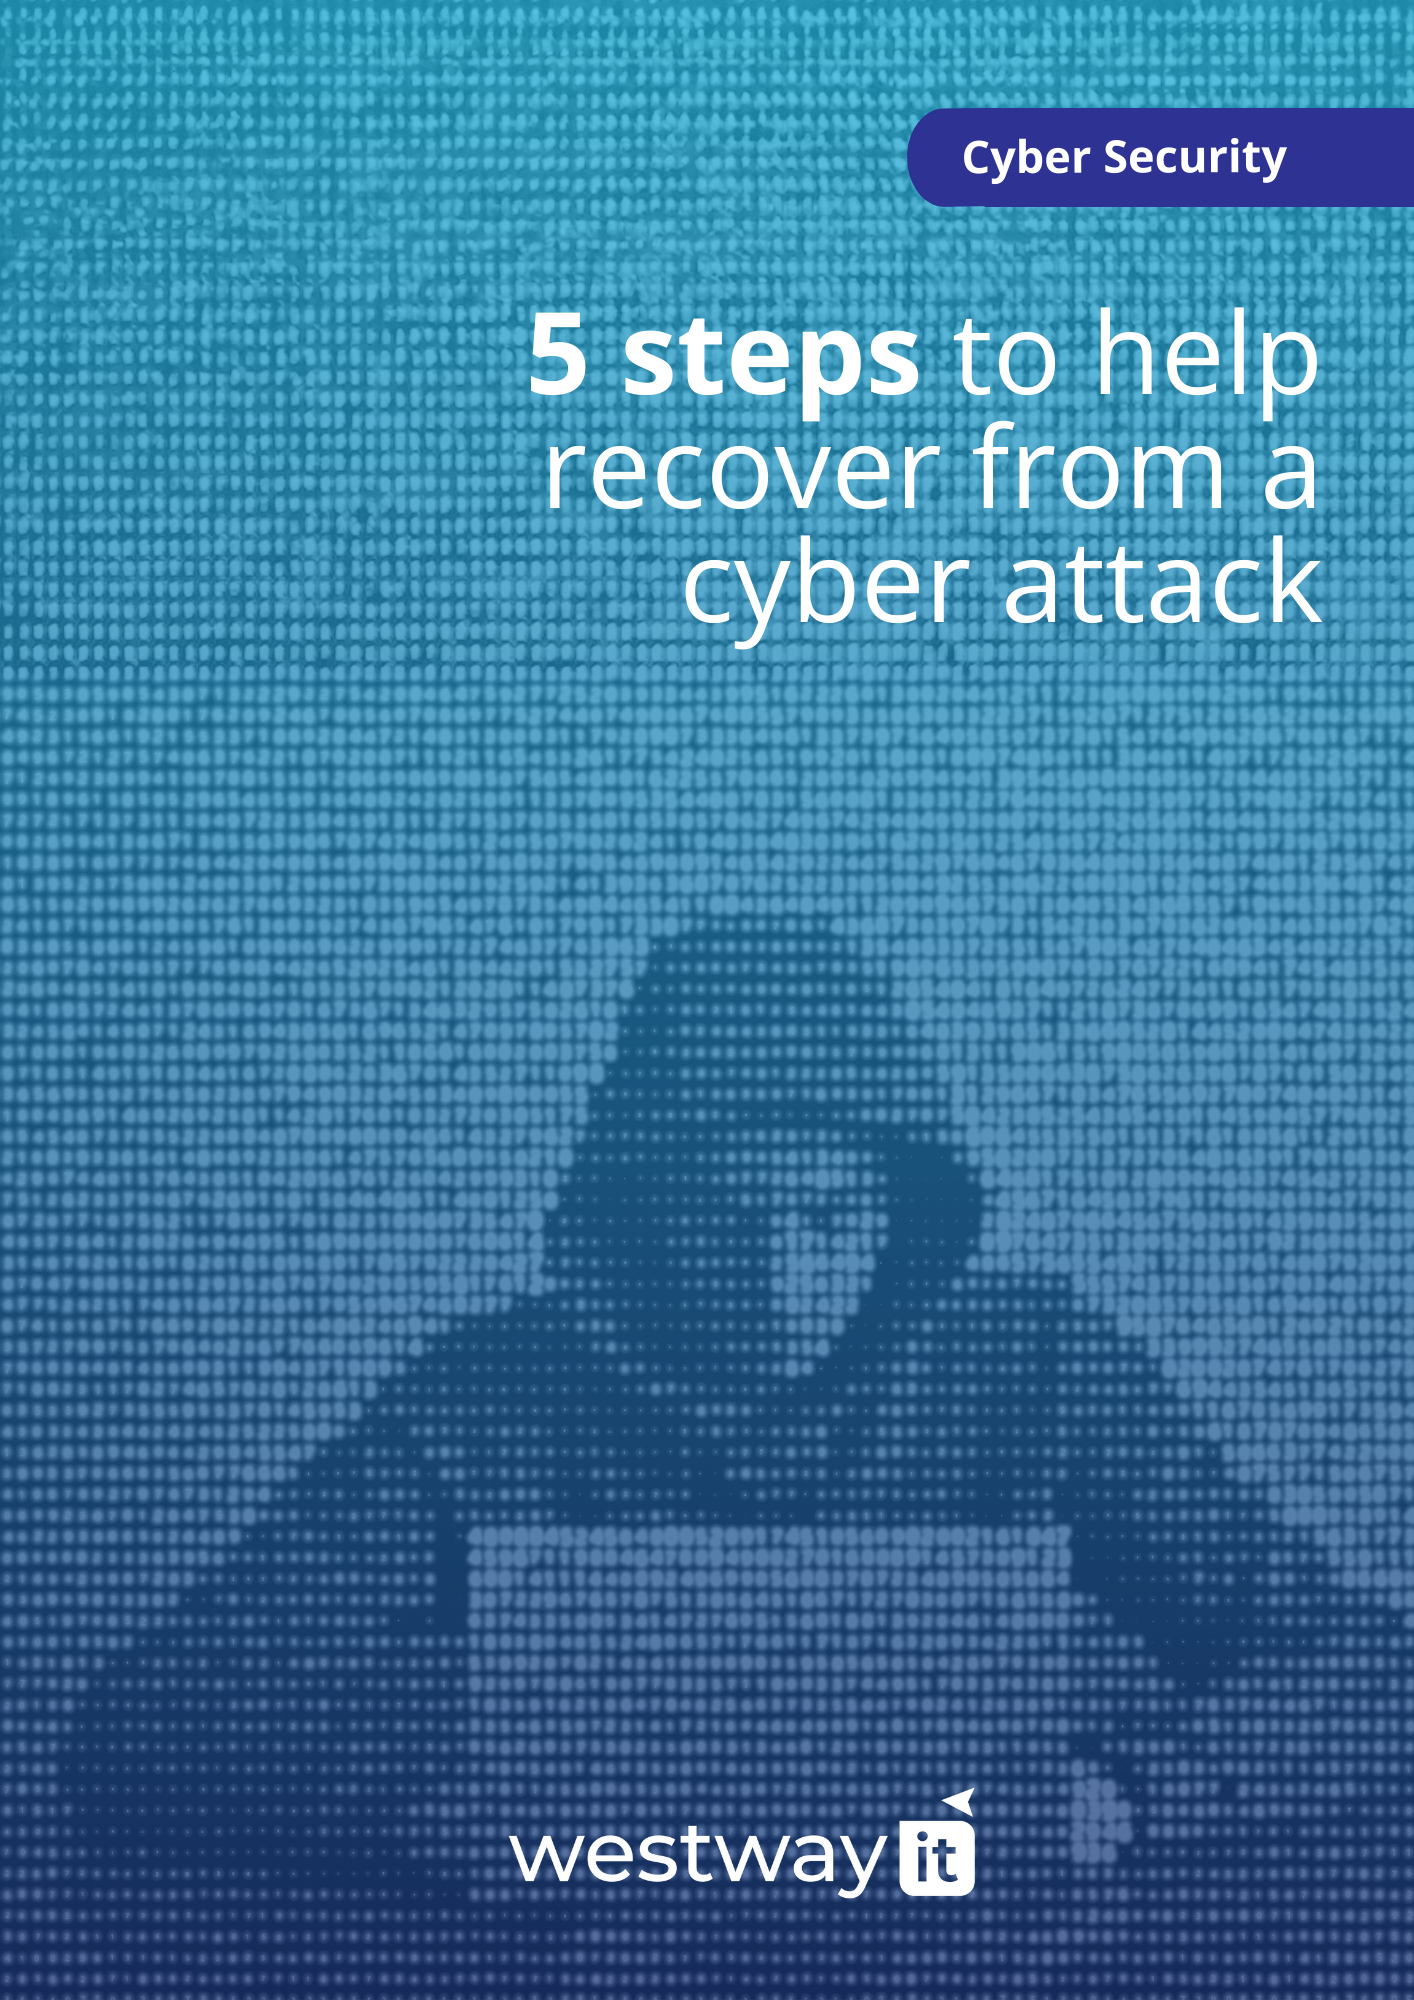 Be Prepared: Plan Ahead to Handle Cyber Attacks